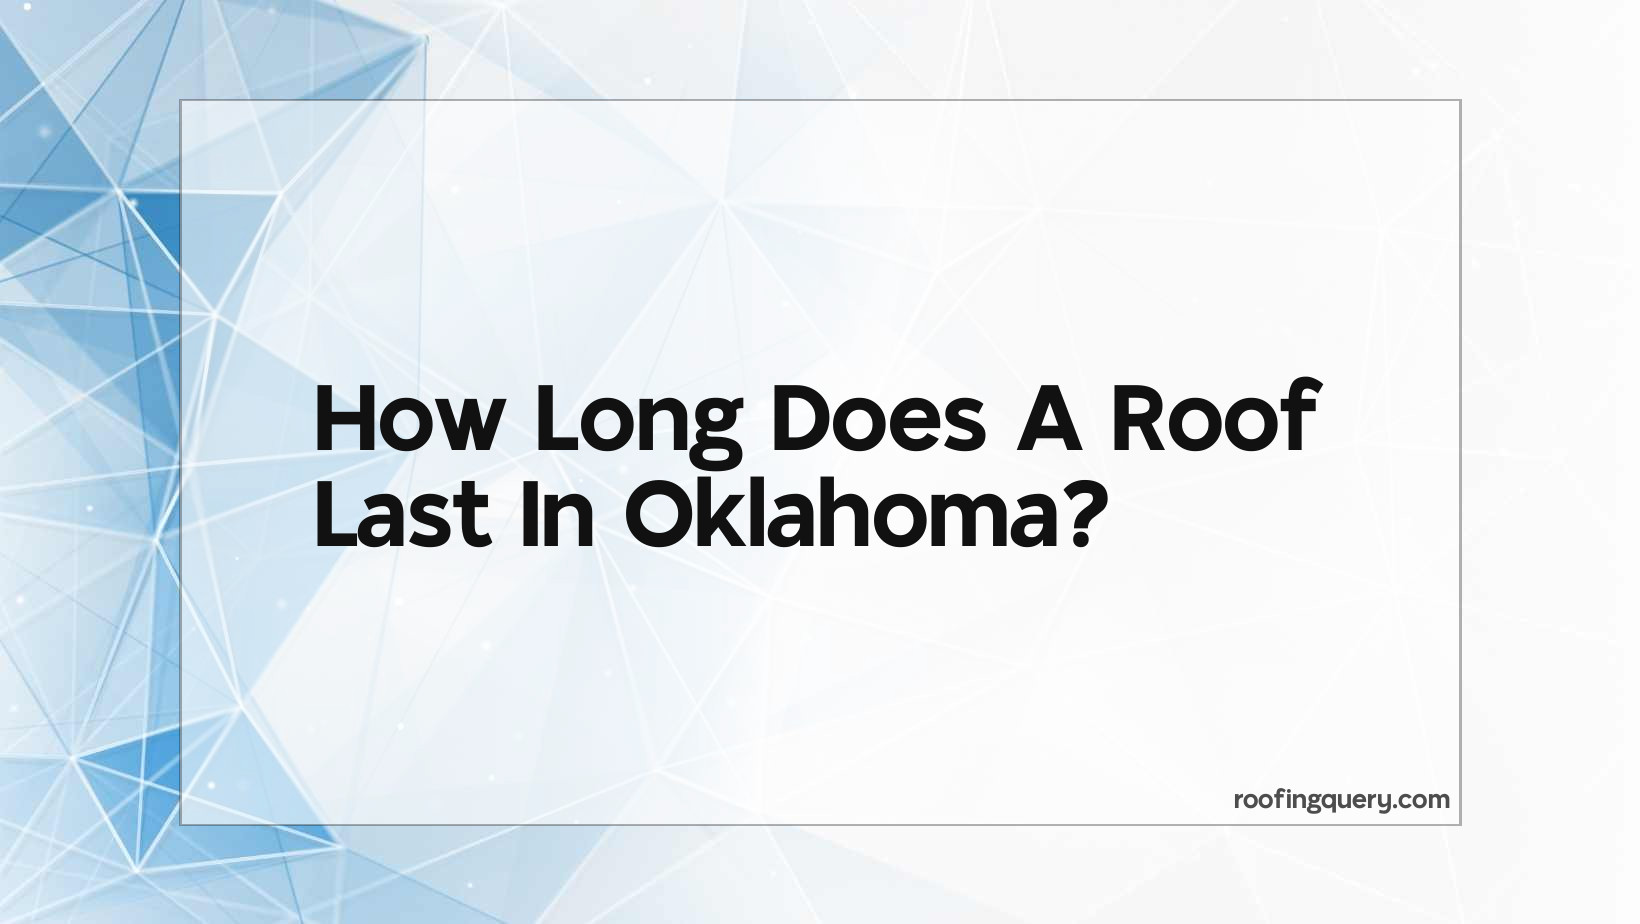 How Long Does A Roof Last In Oklahoma?